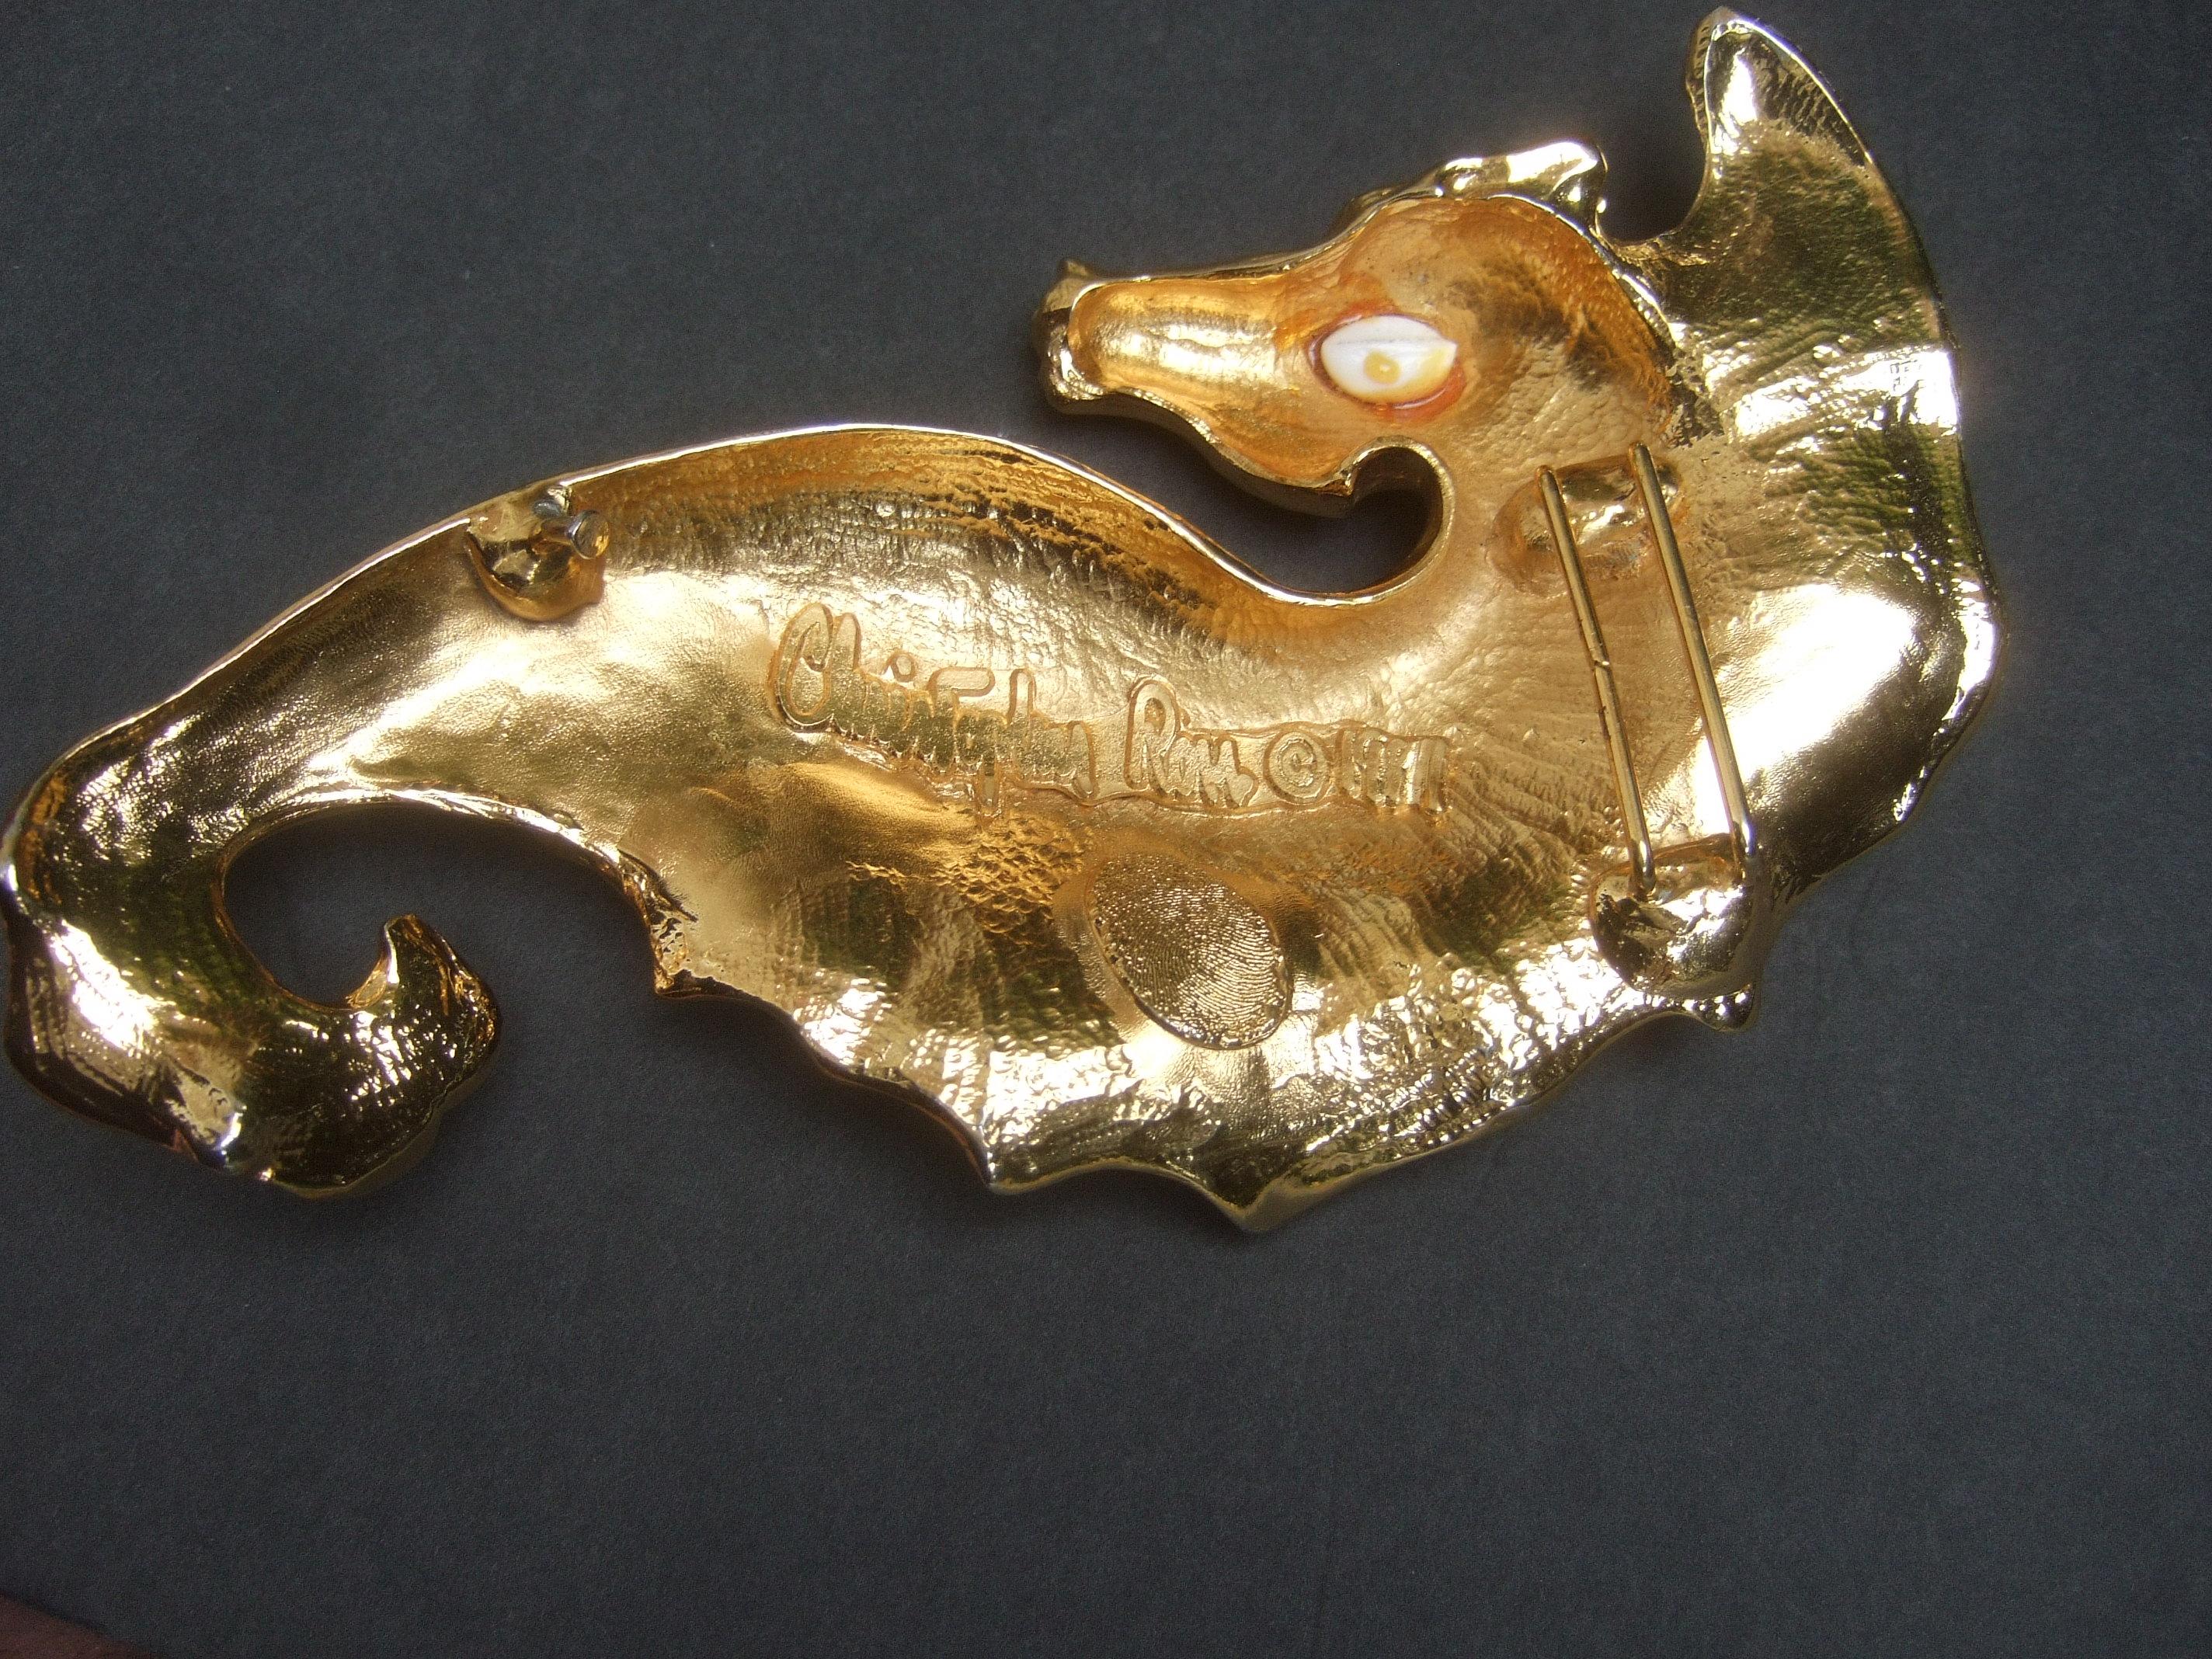 Christopher Ross Rare Massive 24k Gold Plated Seahorse Belt Buckle c 1980s For Sale 6